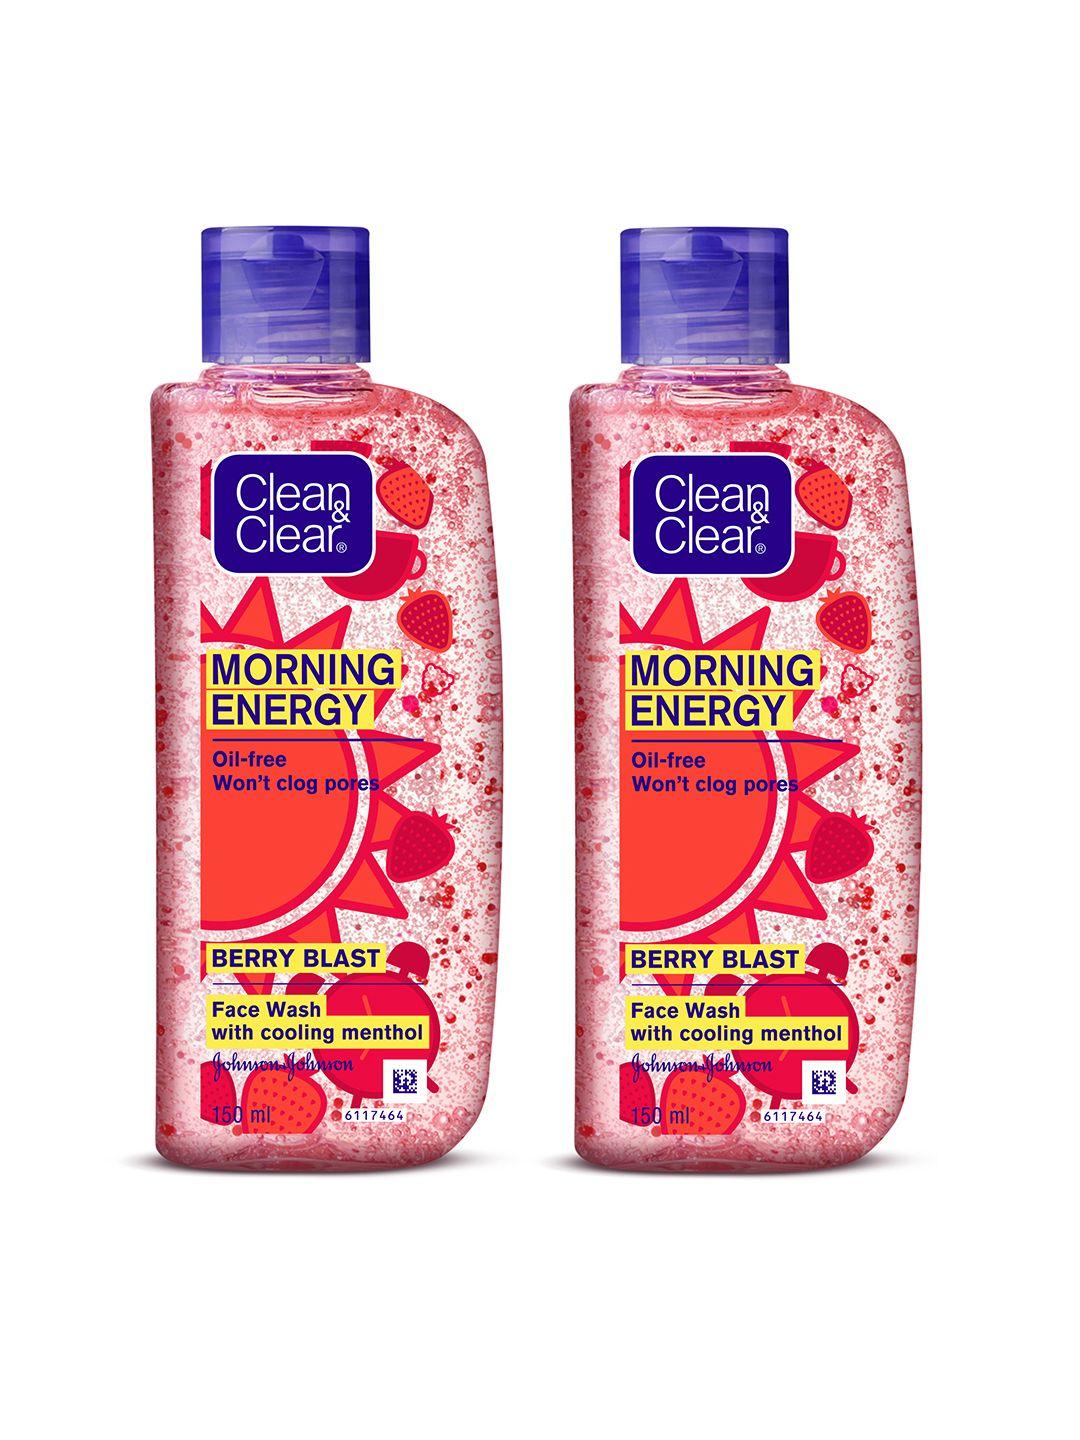 clean&clear-set-of-2-morning-energy-berry-blast-face-wash-with-cooling-menthol--150ml-each